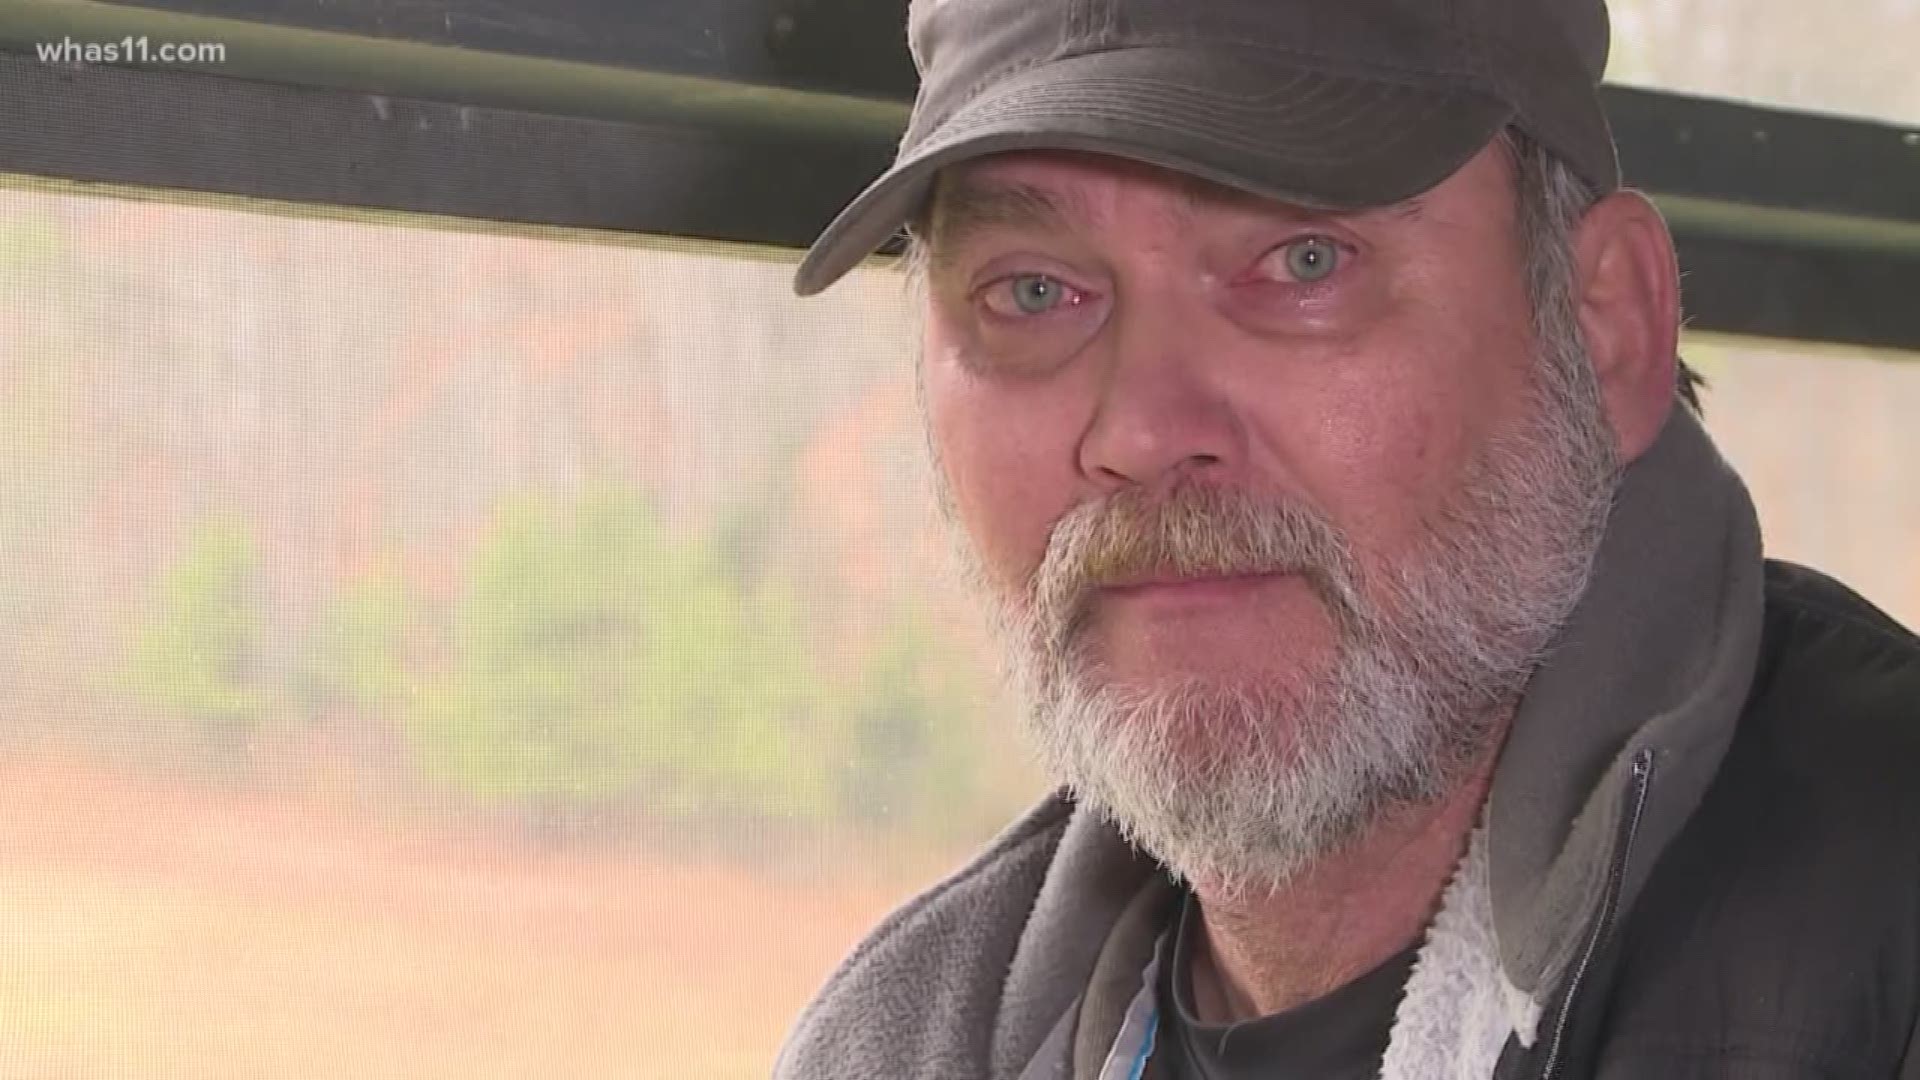 Gary Brocar called 911 when he saw the plane crash in Memphis, Indiana. He searched through the woods, calling for survivors and was devastated when he got to the scene.